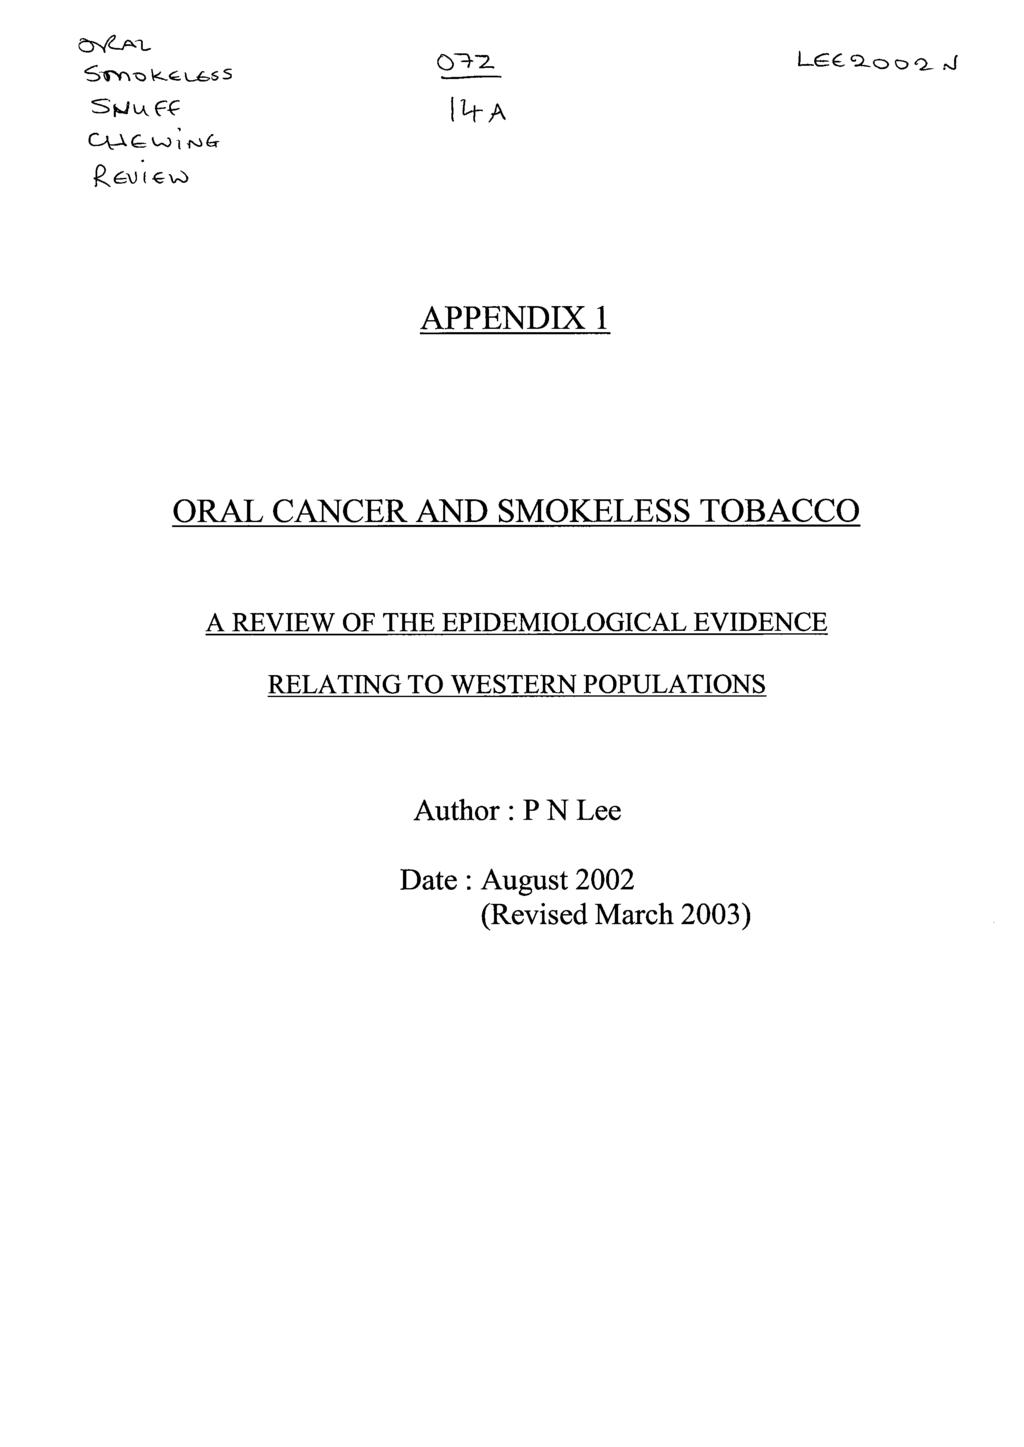 APPENDIX 1 ORAL CANCER AND SMOKELESS TOBACCO A REVIEW OF THE EPIDEMIOLOGICAL EVIDENCE